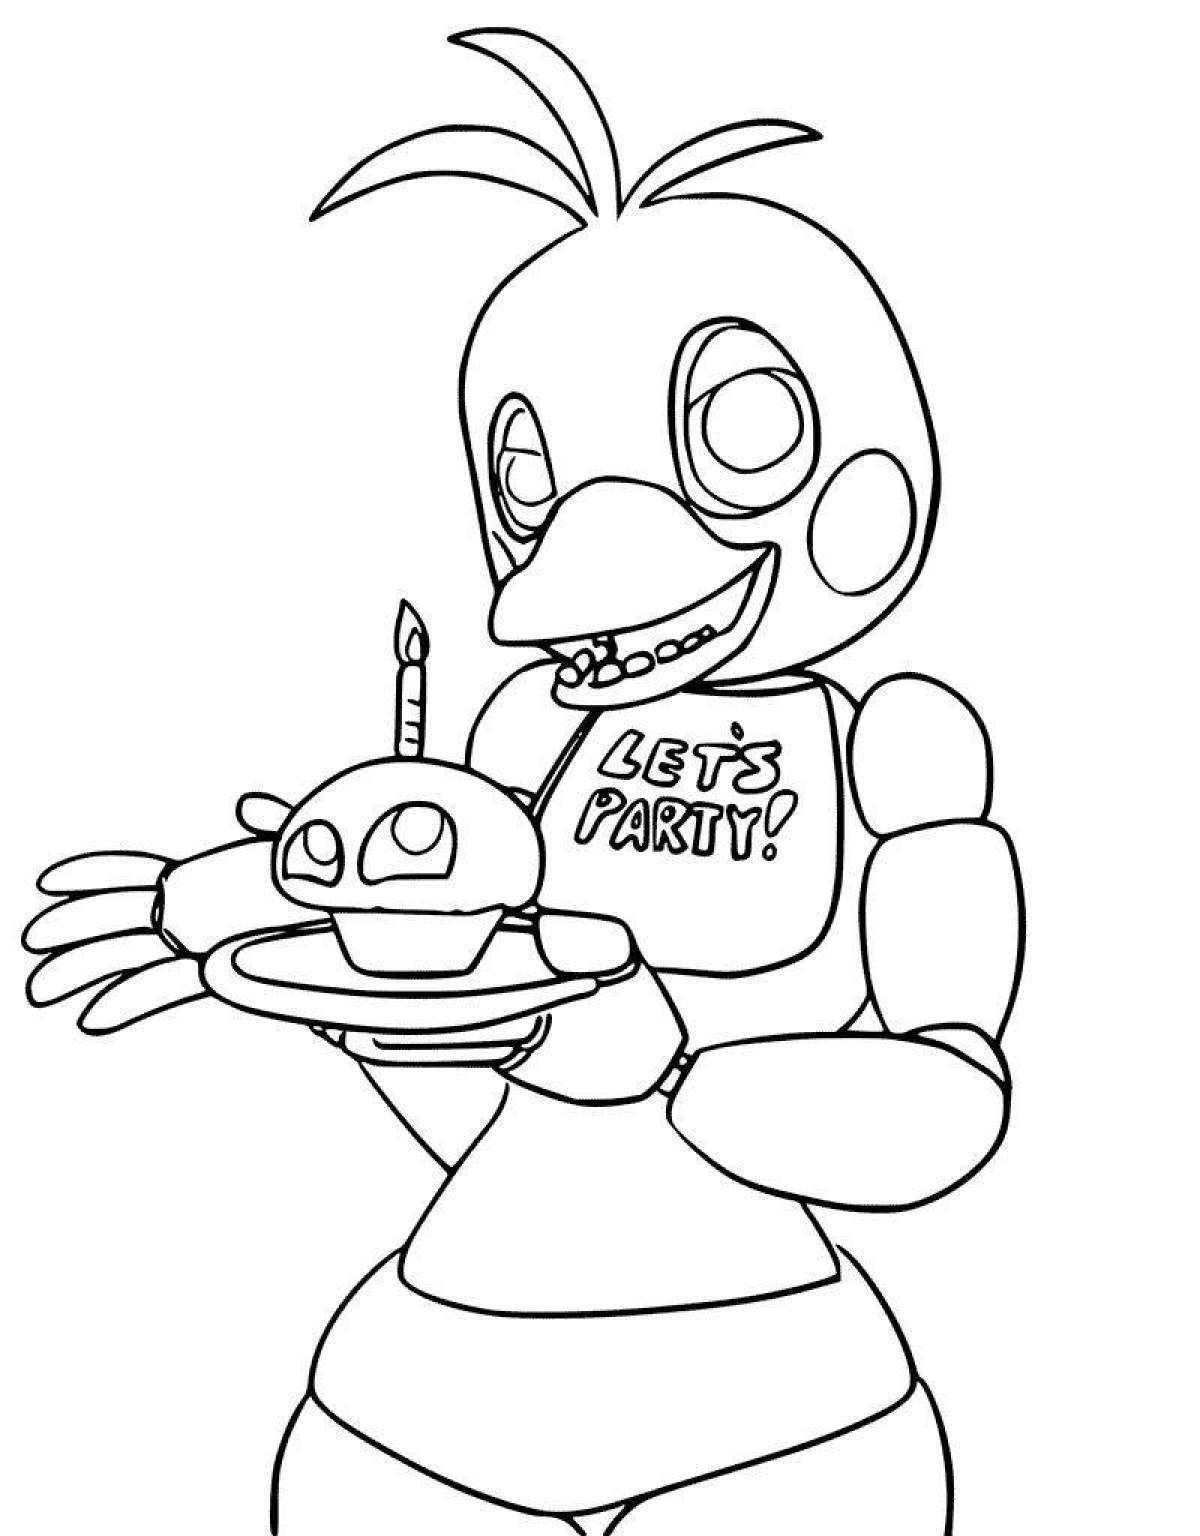 Fabulous freddy robot coloring page